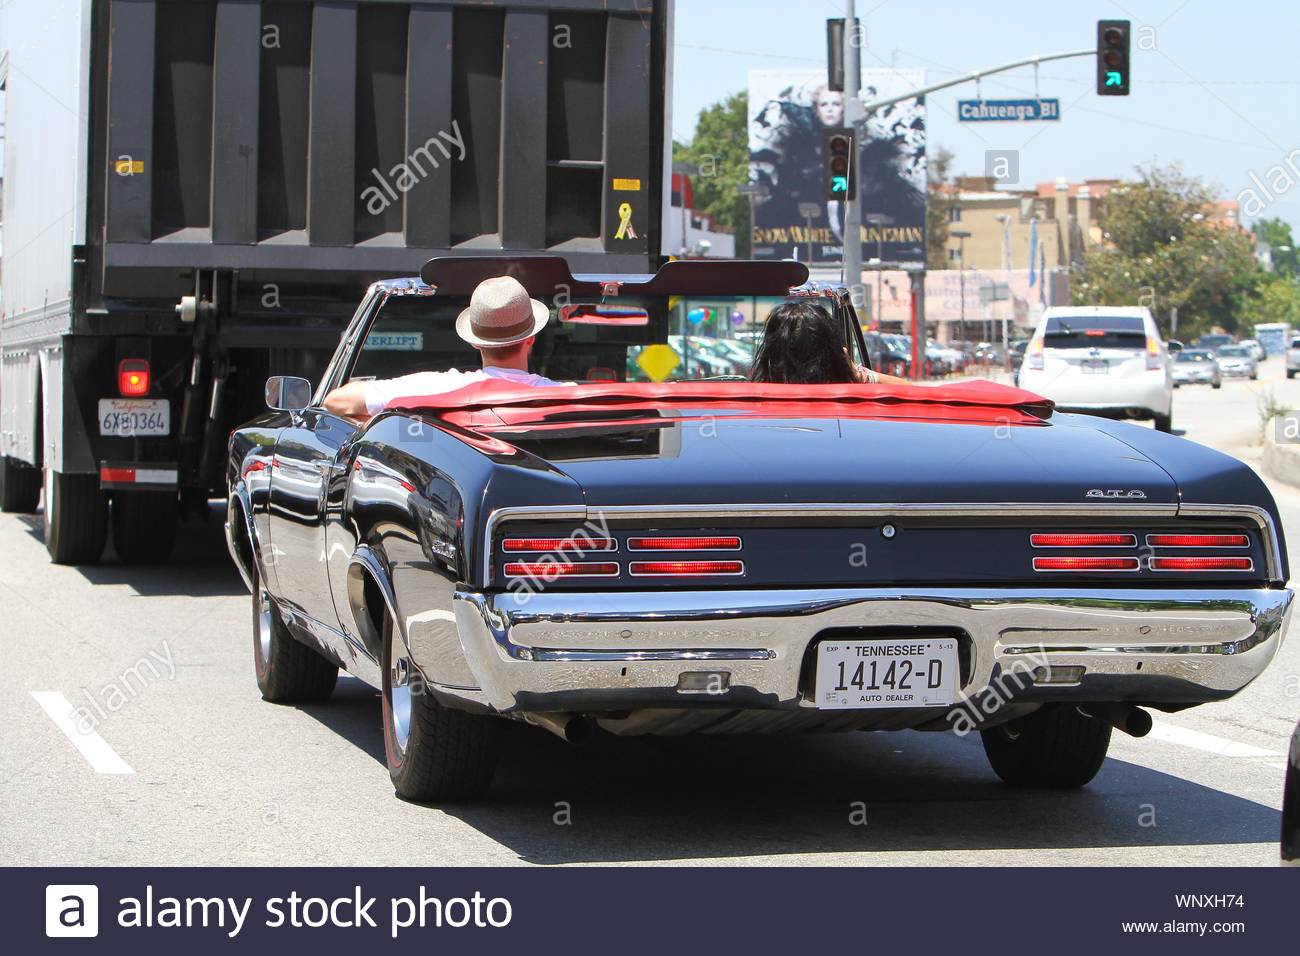 los-angeles-ca-justin-timberlake-was-out-and-about-today-in-los-angeles-cruising-along-in-his-pontiac-gto-with-a-mystery-lady-before-exiting-the-car-justin-looked-over-at-the-pretty-brunette-and-walked-away-as-the-mystery-woman-smiled-for-the-camera-before-exiting-the-car-herself-akm-gsi-may-22-2012-WNXH74.jpg